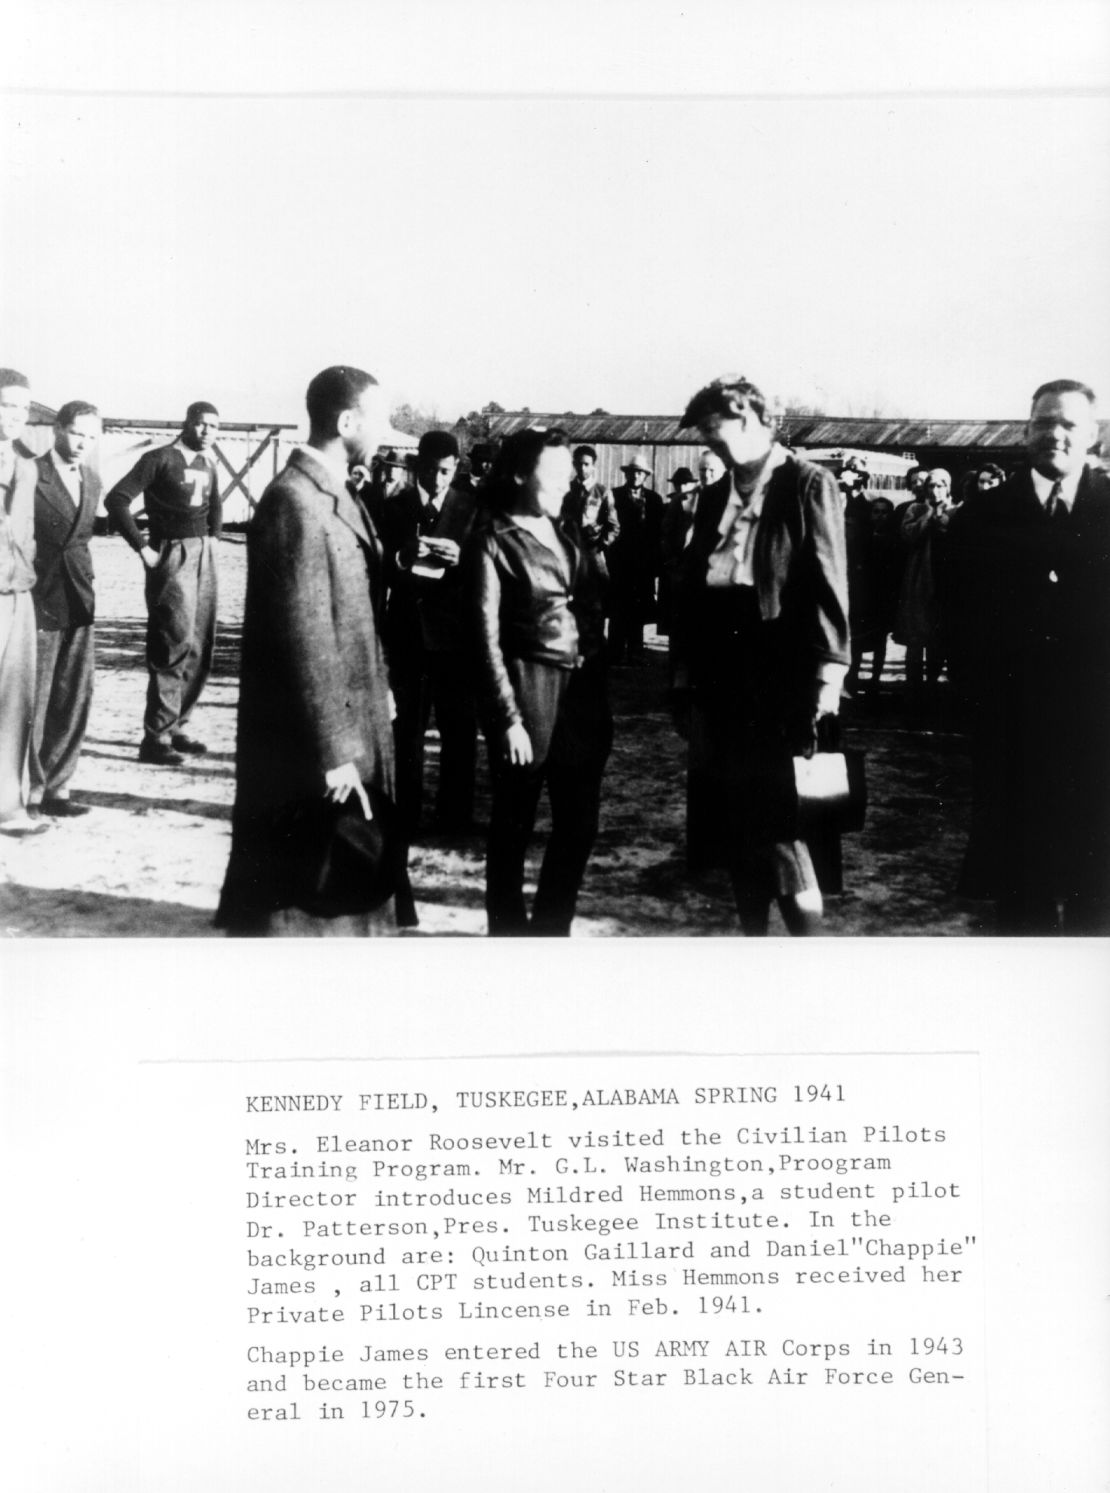 In March 1941 in Tuskegee, Mildred Hemmons met Eleanor Roosevelt, whose support helped bolster the program.